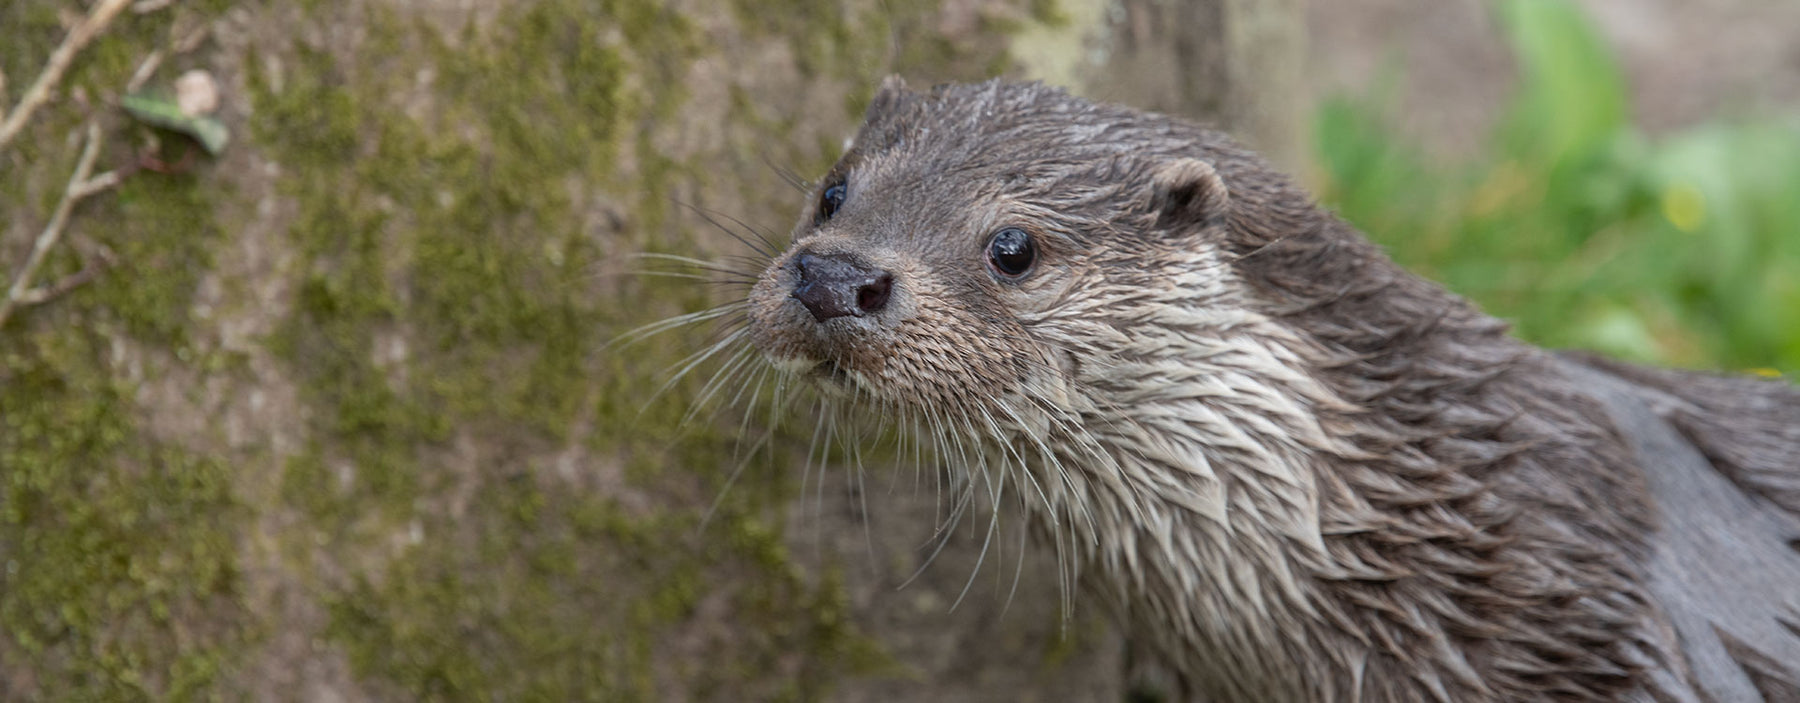 English Otter at Otters and Butterflies, Devon